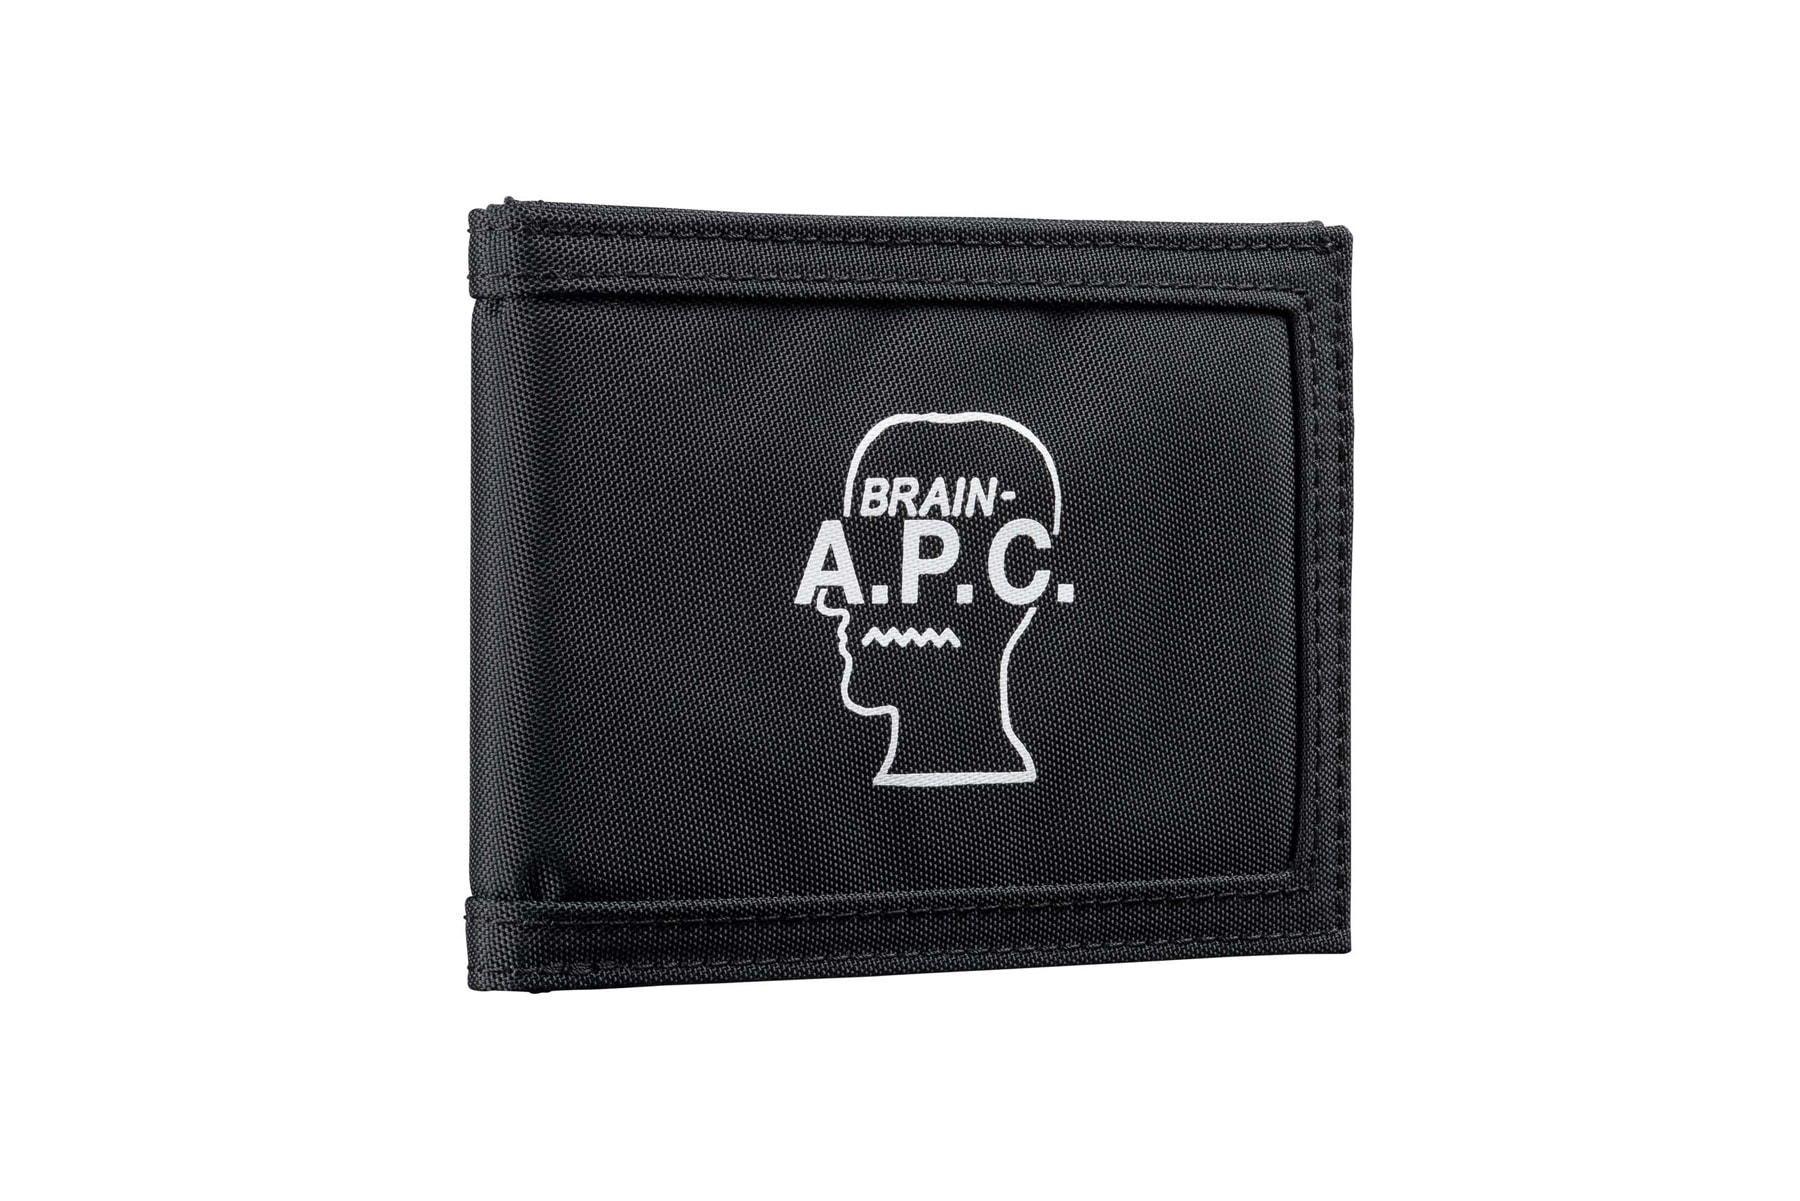 A.P.C. x Brain Dead "Interaction" Capsule fall winter 2019 collection denim hats pants bag tote kyle ng exclusive Silver Lake store los angeles future shock pop up silver lake los angeles la